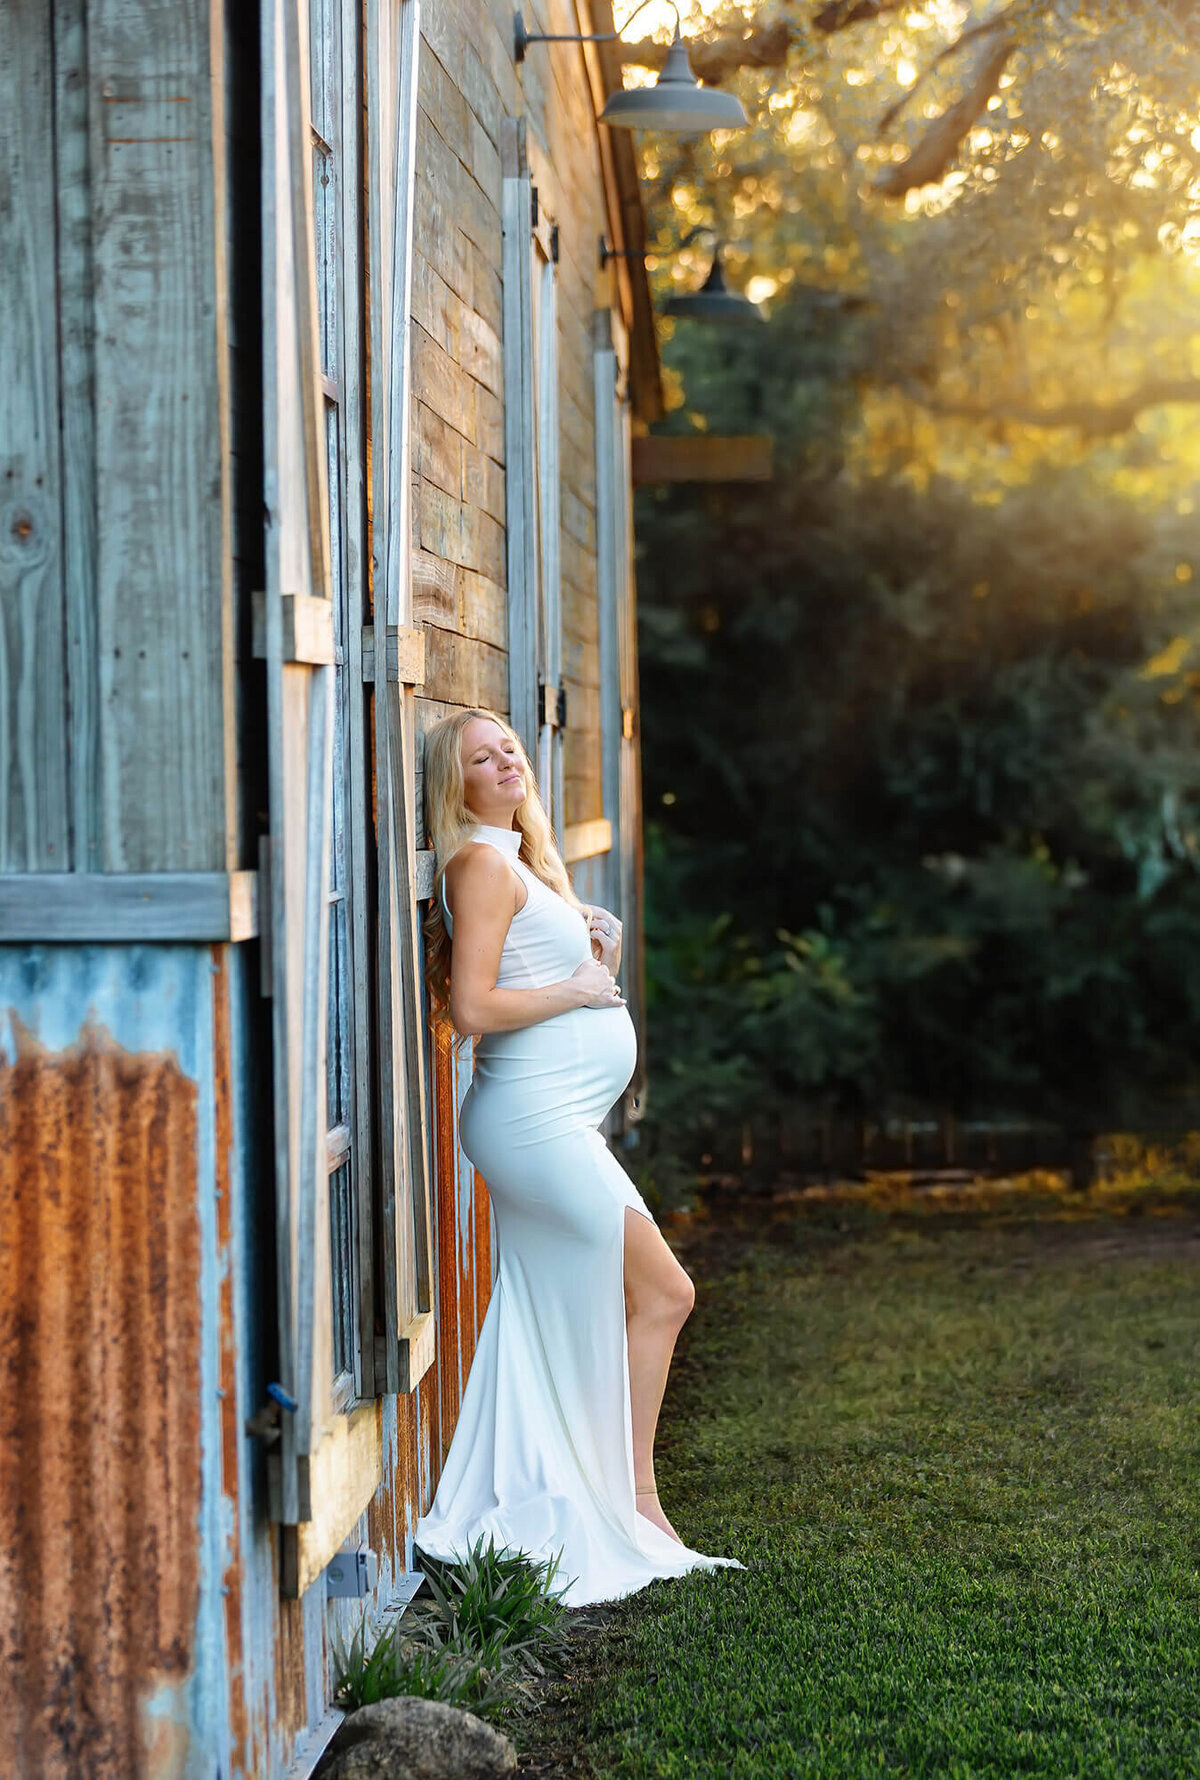 Stunning pregnant woman wearing a white dress photographer during golden hour by Texas photographer Danielle Dott Photography.